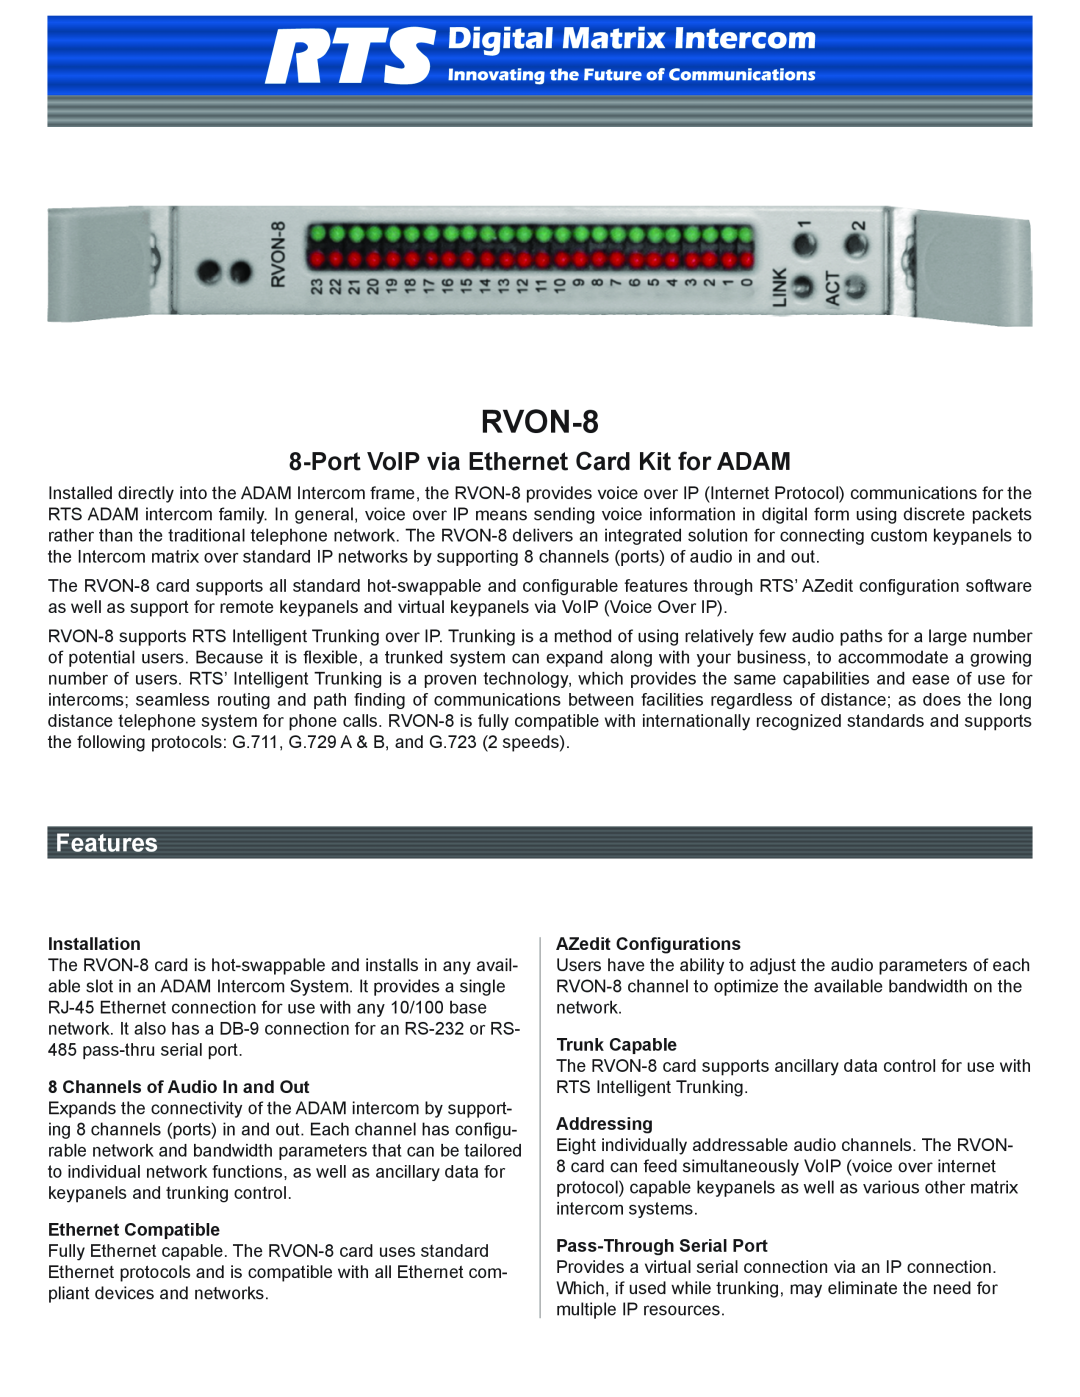 RTS RVON-8 manual Installation, Channels of Audio In and Out, Ethernet Compatible, AZedit Configurations, Trunk Capable 